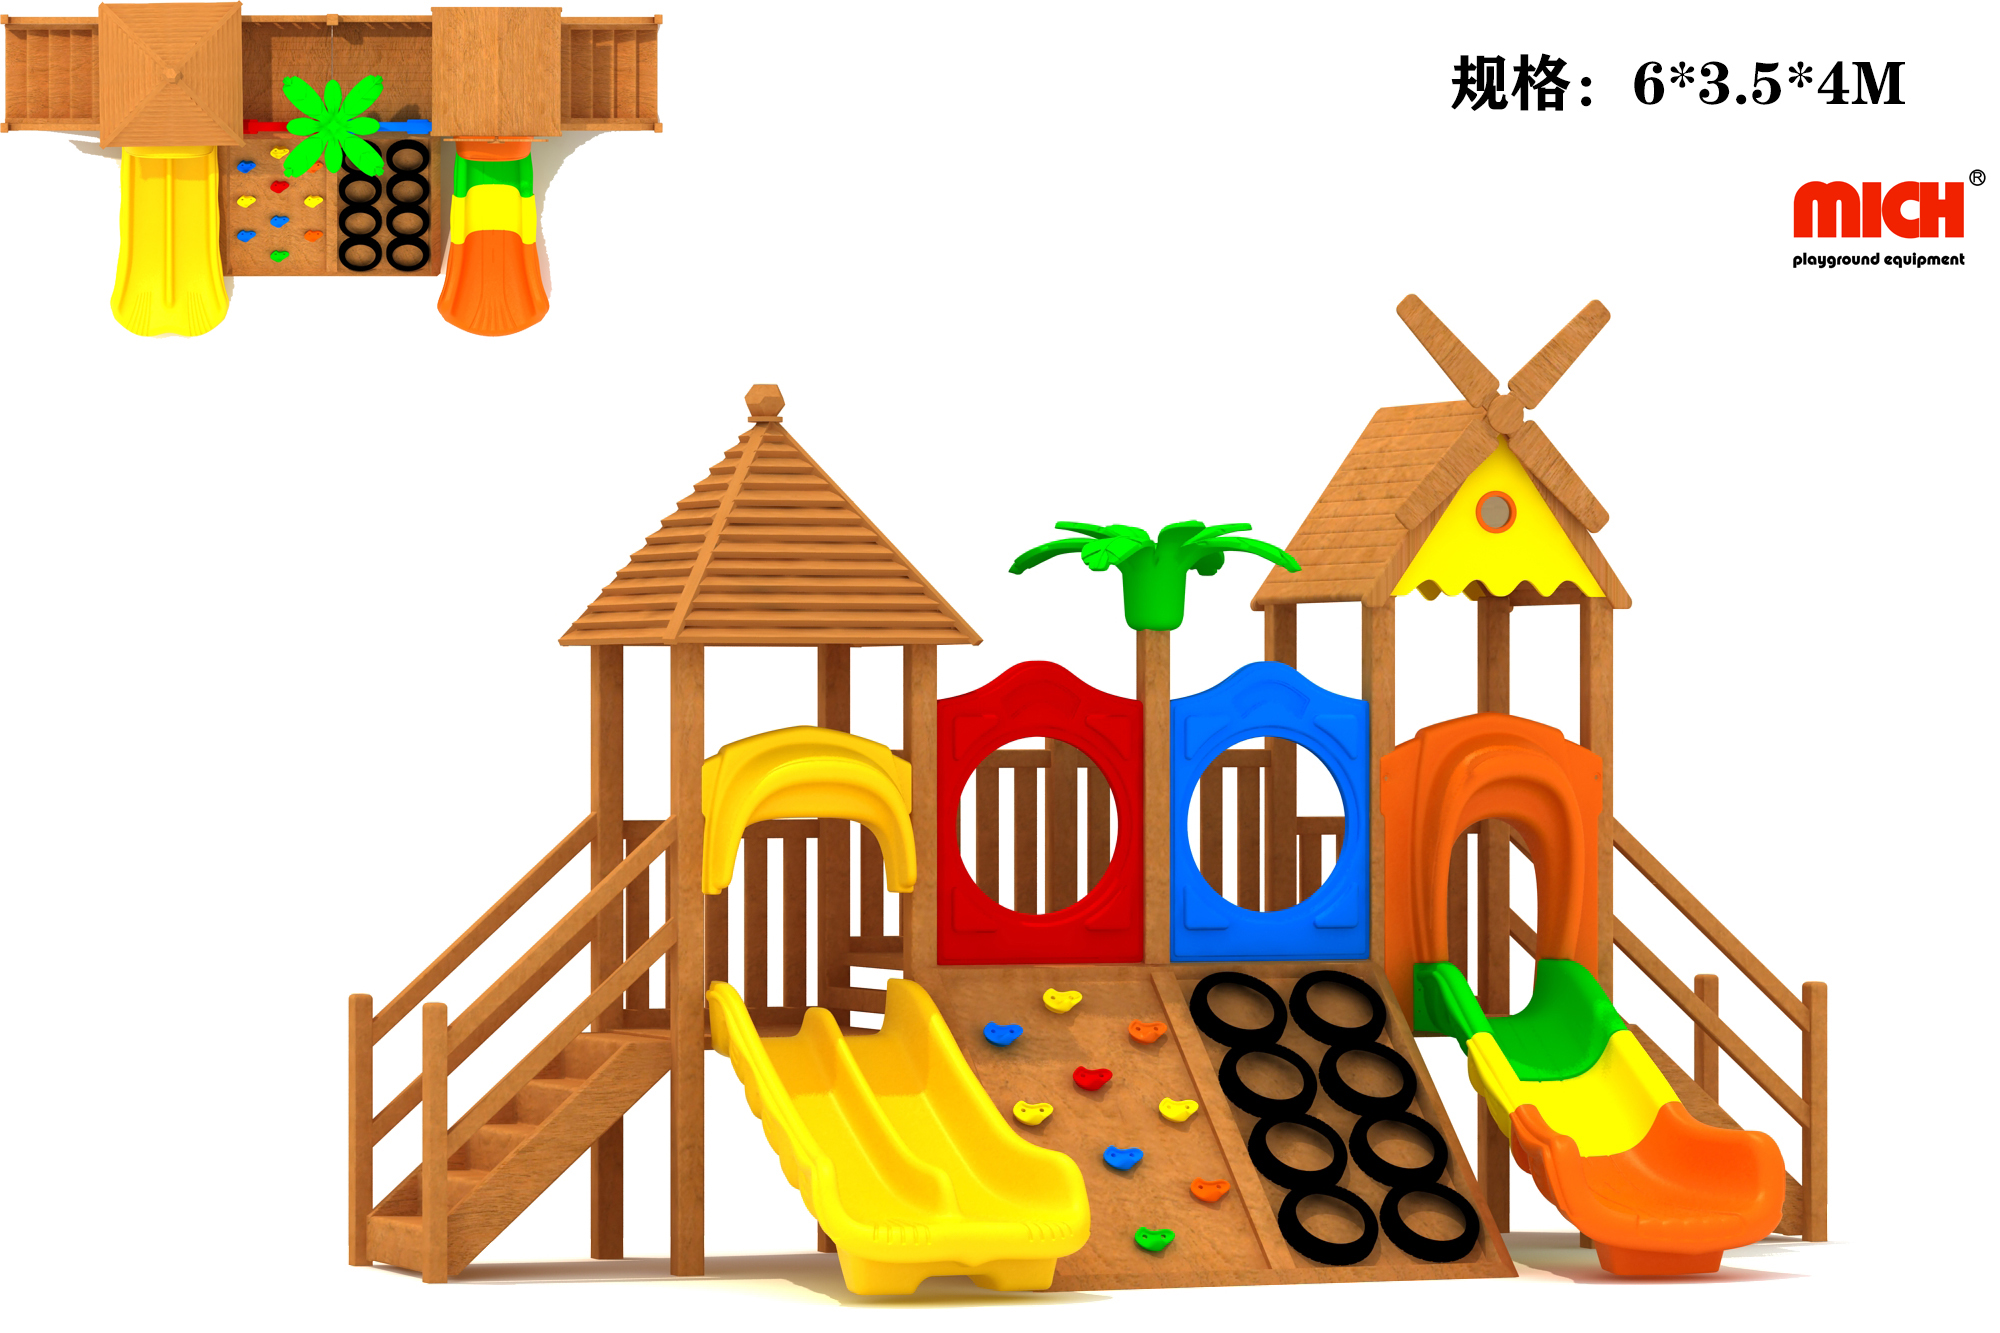 What are the advantages of outdoor playground equipment?